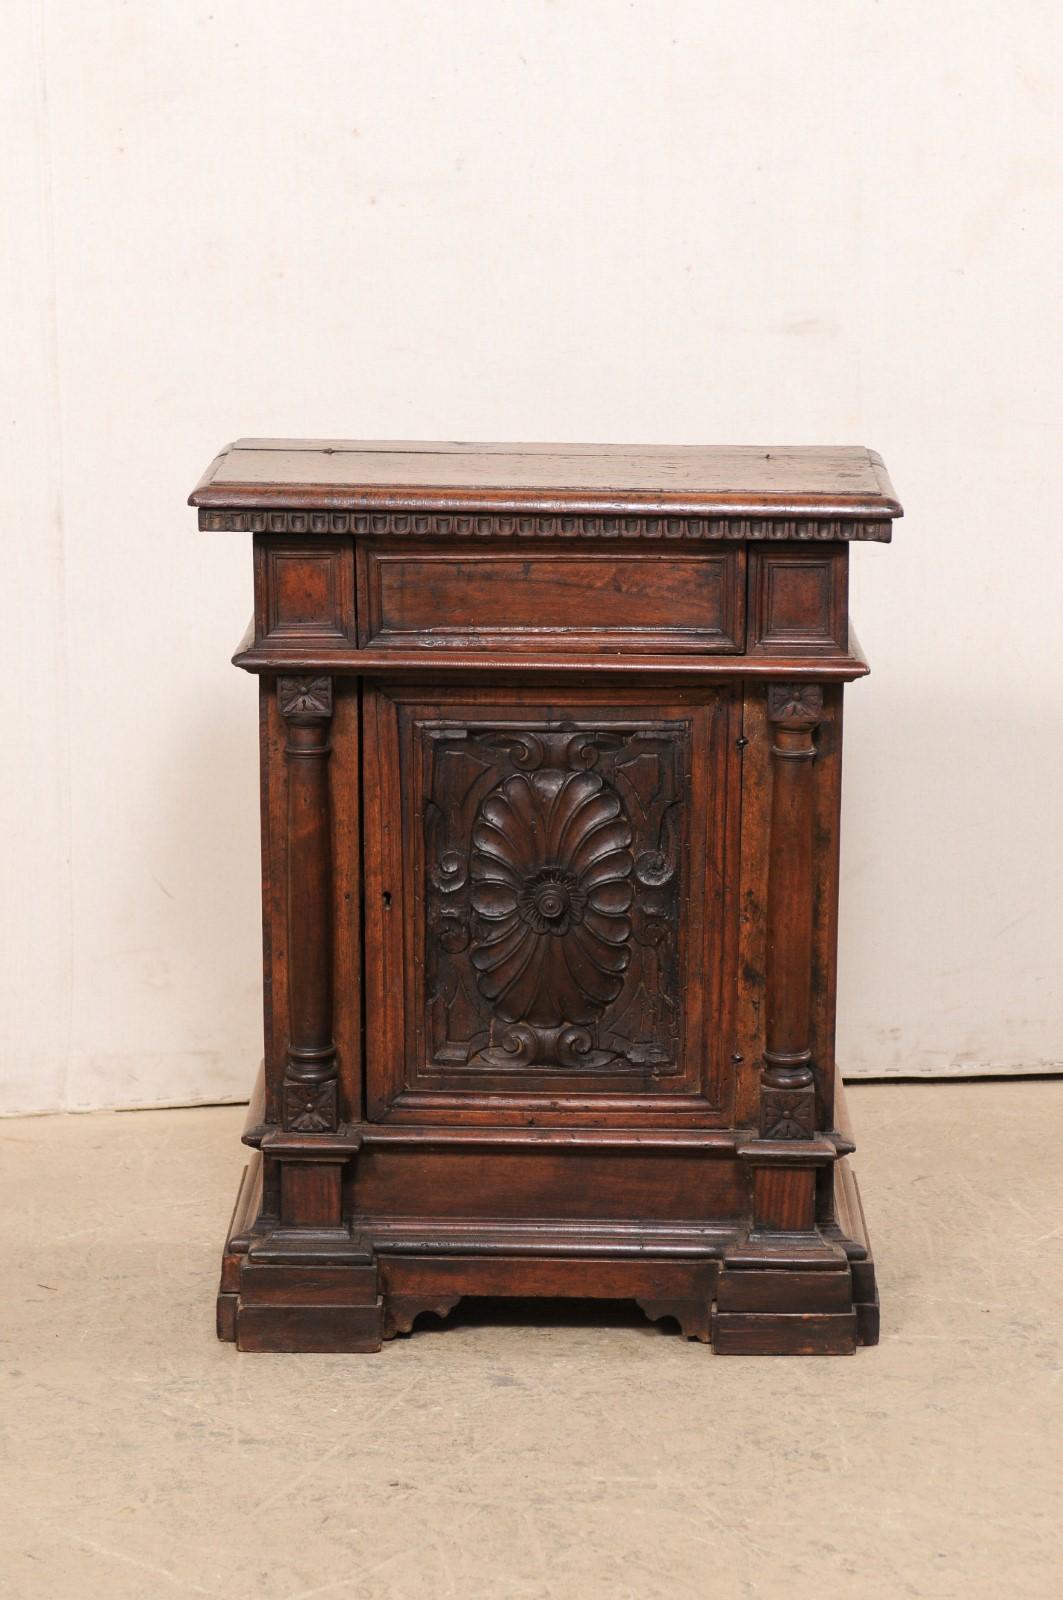 An Italian small-sized walnut wood cabinet, with butler's desk style top, from the 18th century. This antique chest from Italy has a rectangular-shaped top, with hand-carved egg-and-dart trim along it's underside, which rests atop a case which